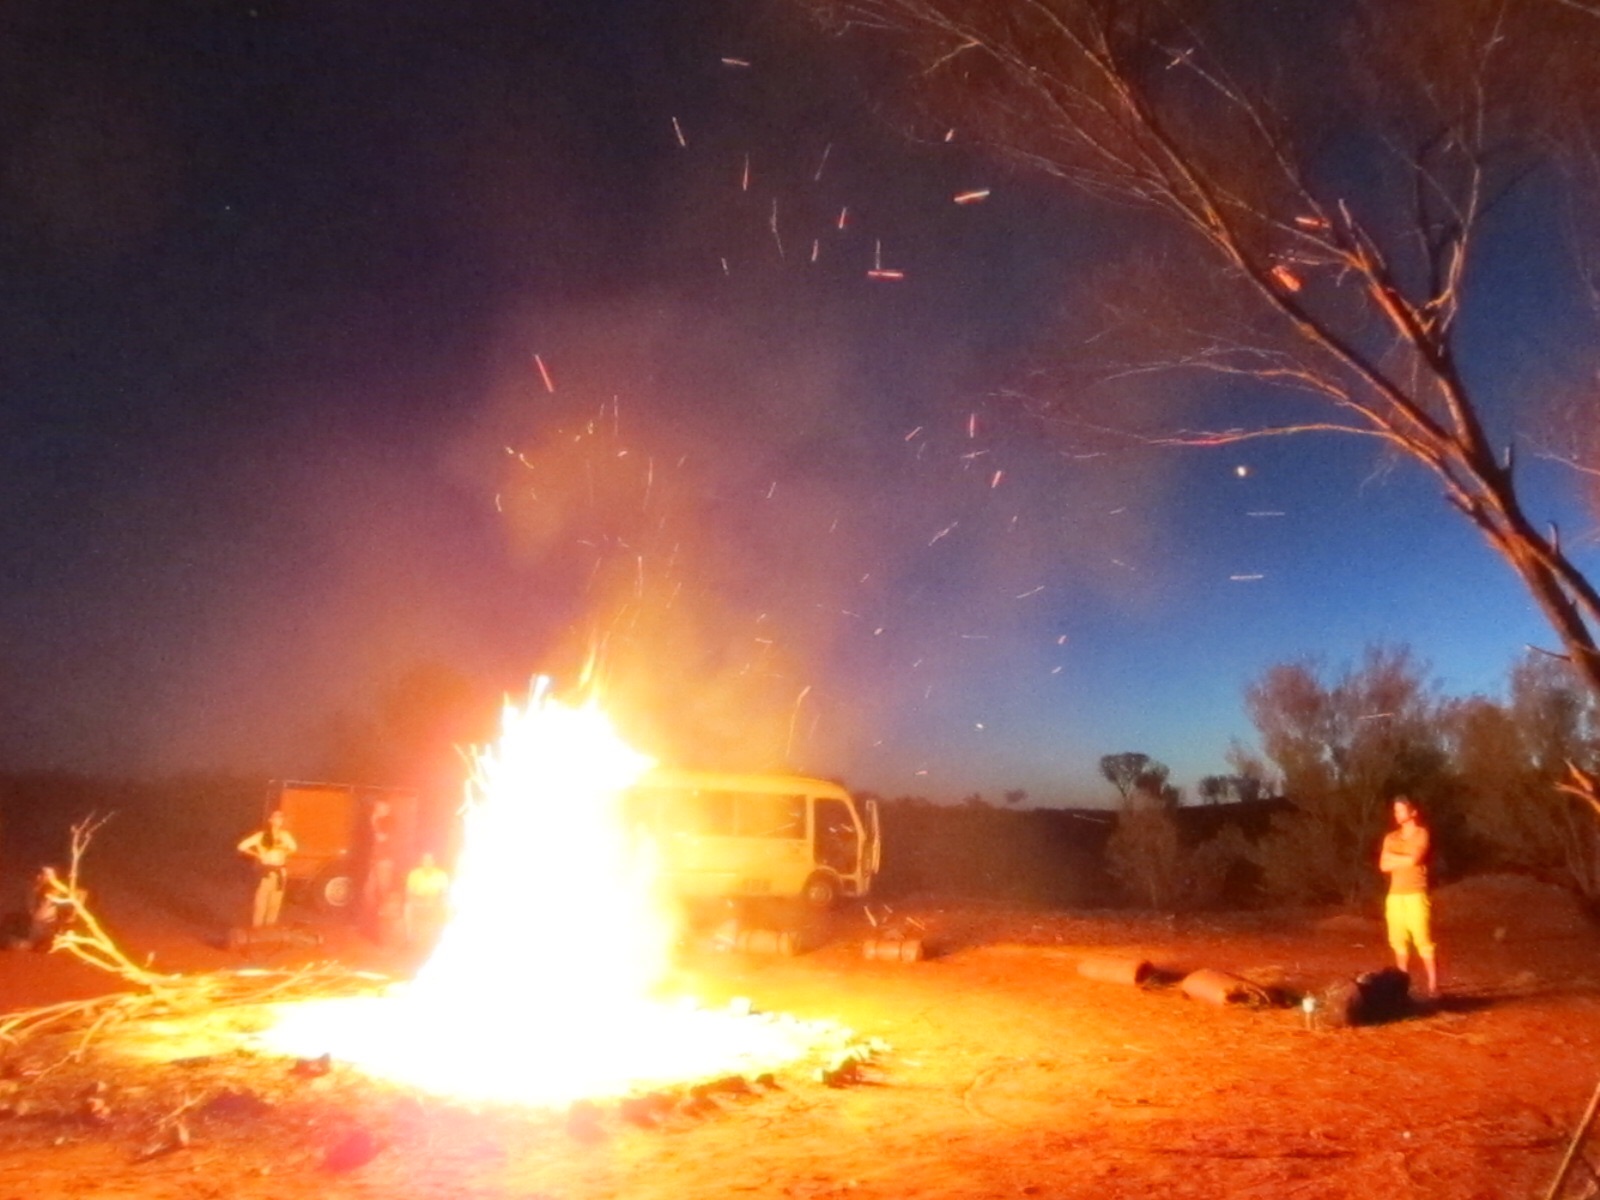 Building a big fire in the outback. No bushfires reported afterwards.